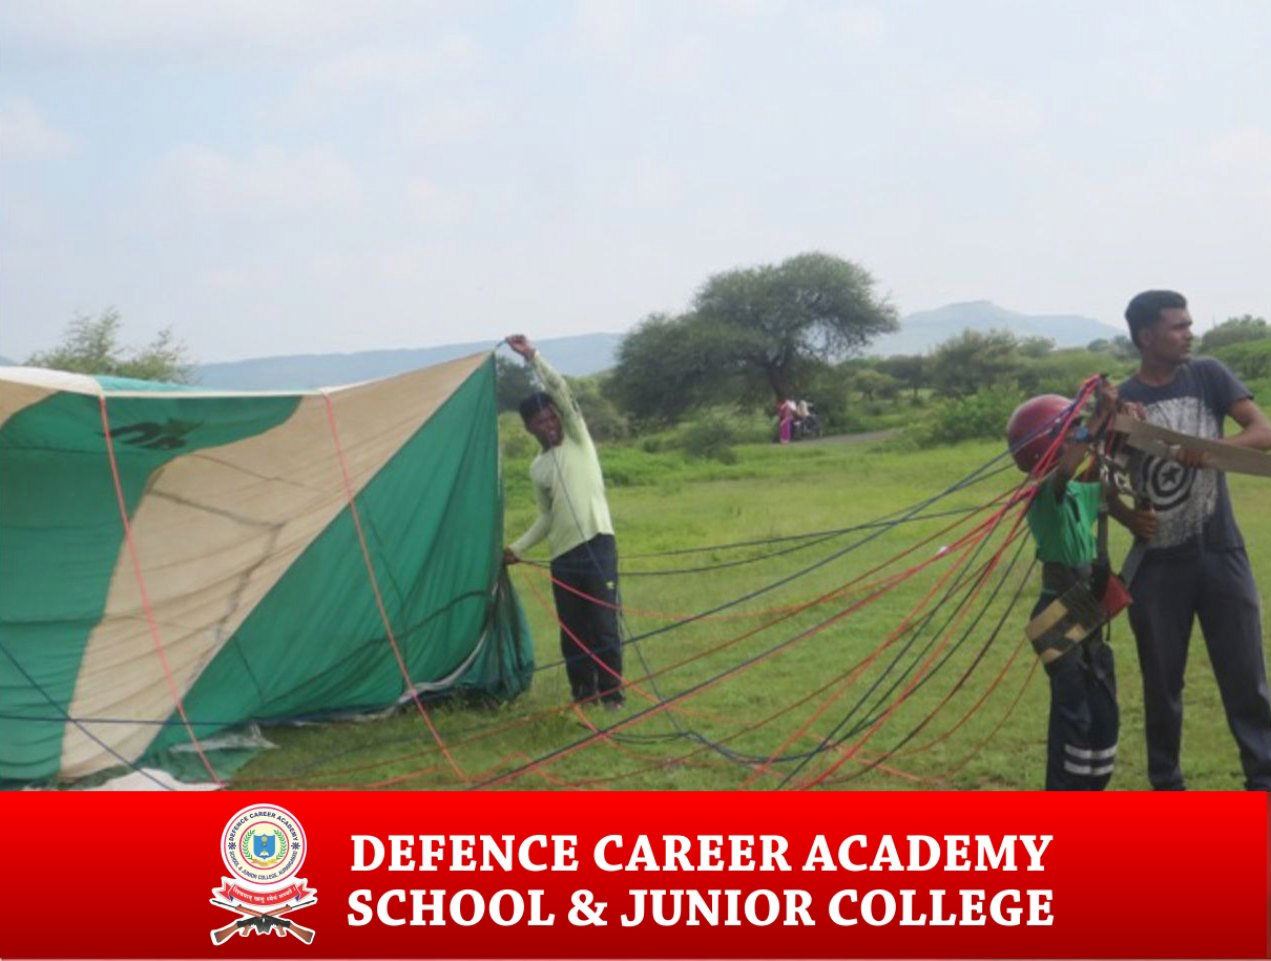 military-school-admission-2020-21-top-military-academies-in-aurangabad-pargliding